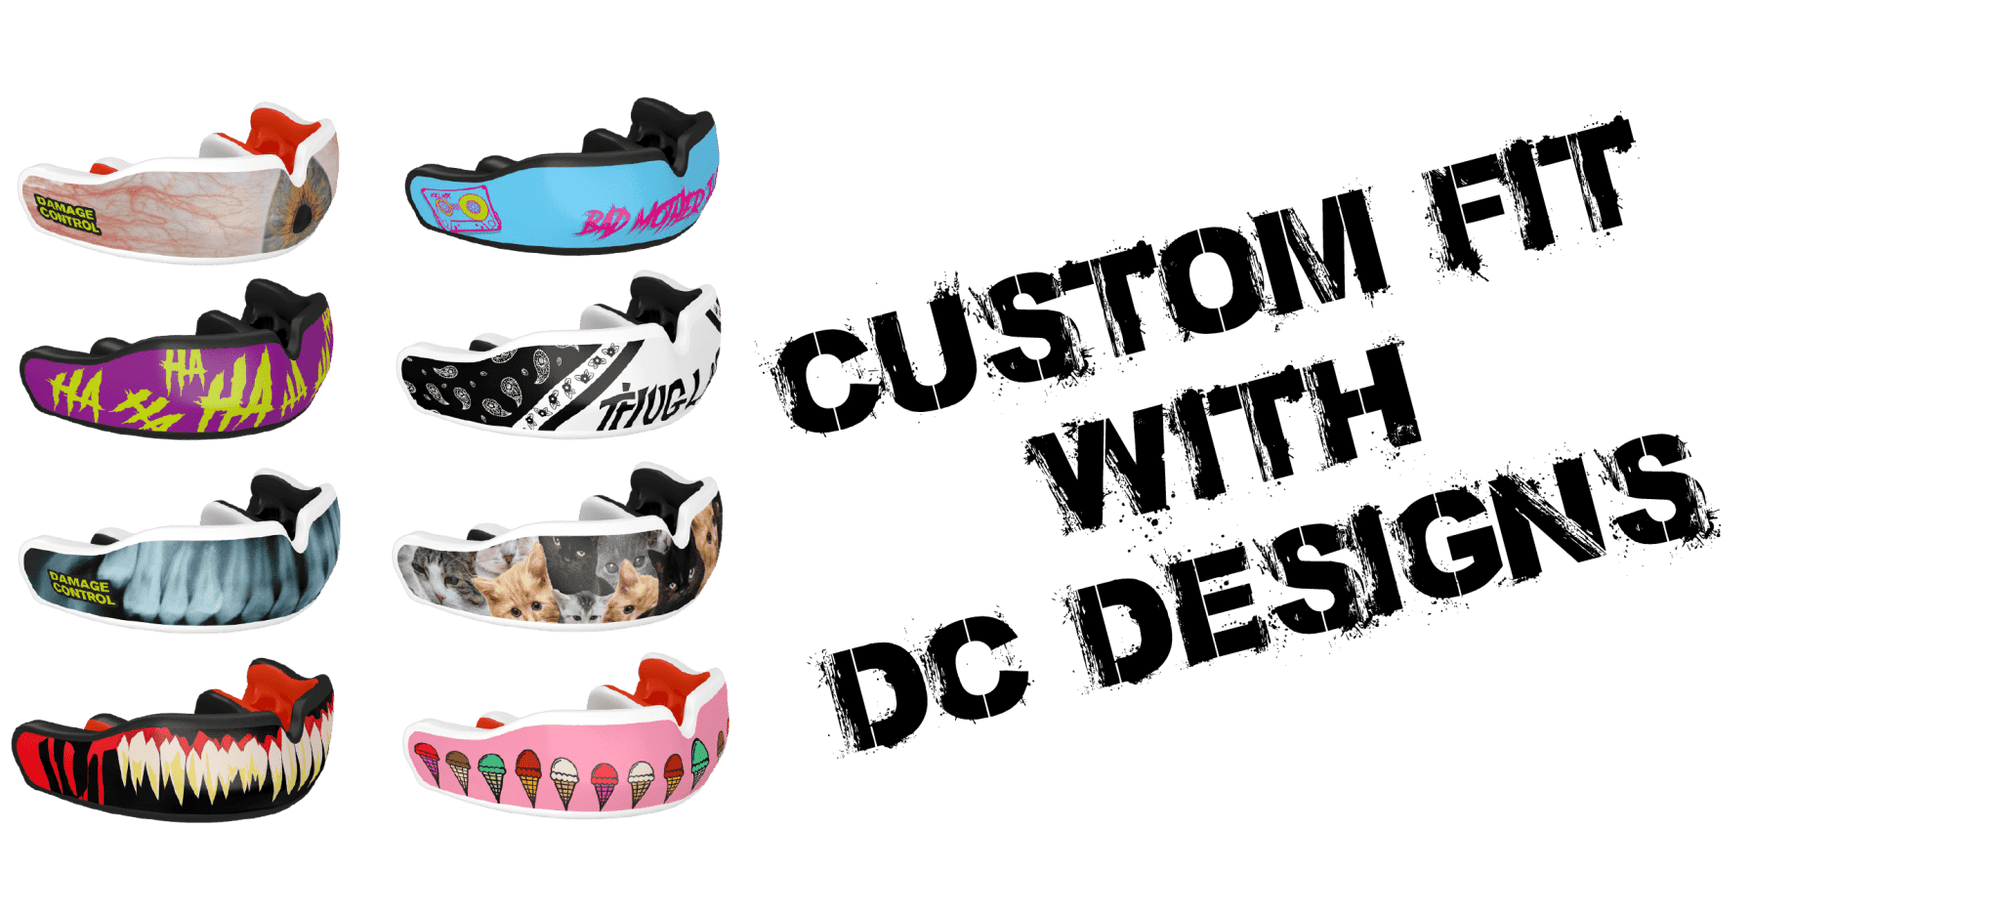 Custom Fit Mouth Guards with Designs by Damage Control